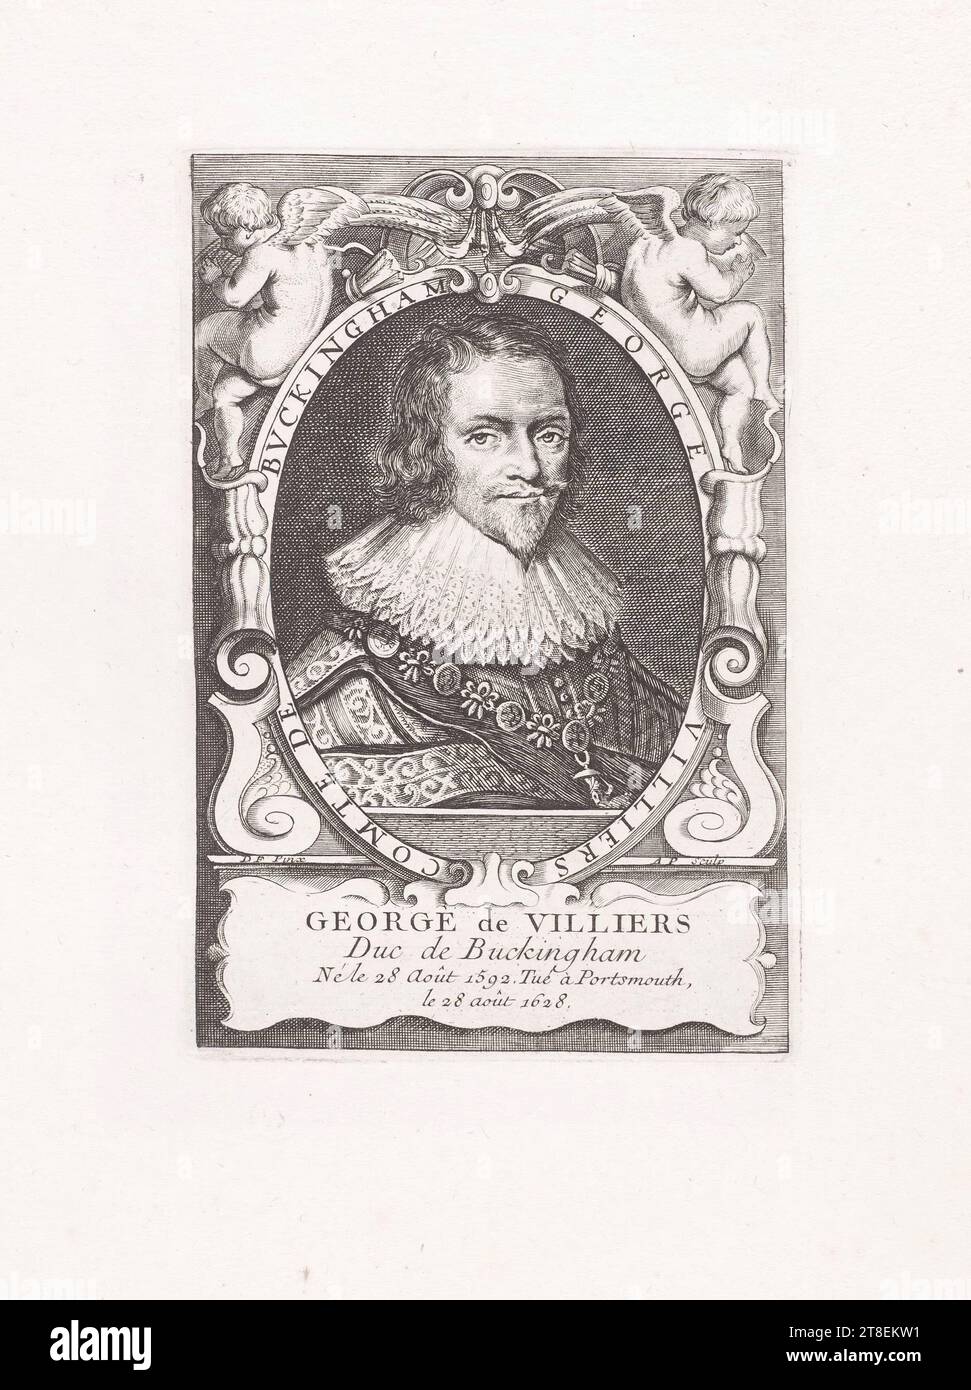 GEORGE VILLIERS EARL OF BVCKINGHAM. D.F. Pinx. A.P. Sculp. GEORGE de VILLIERS Duke of Buckingham, geboren am 28. August 1592. Getötet in Portsmouth, 28. August 1628 Stockfoto